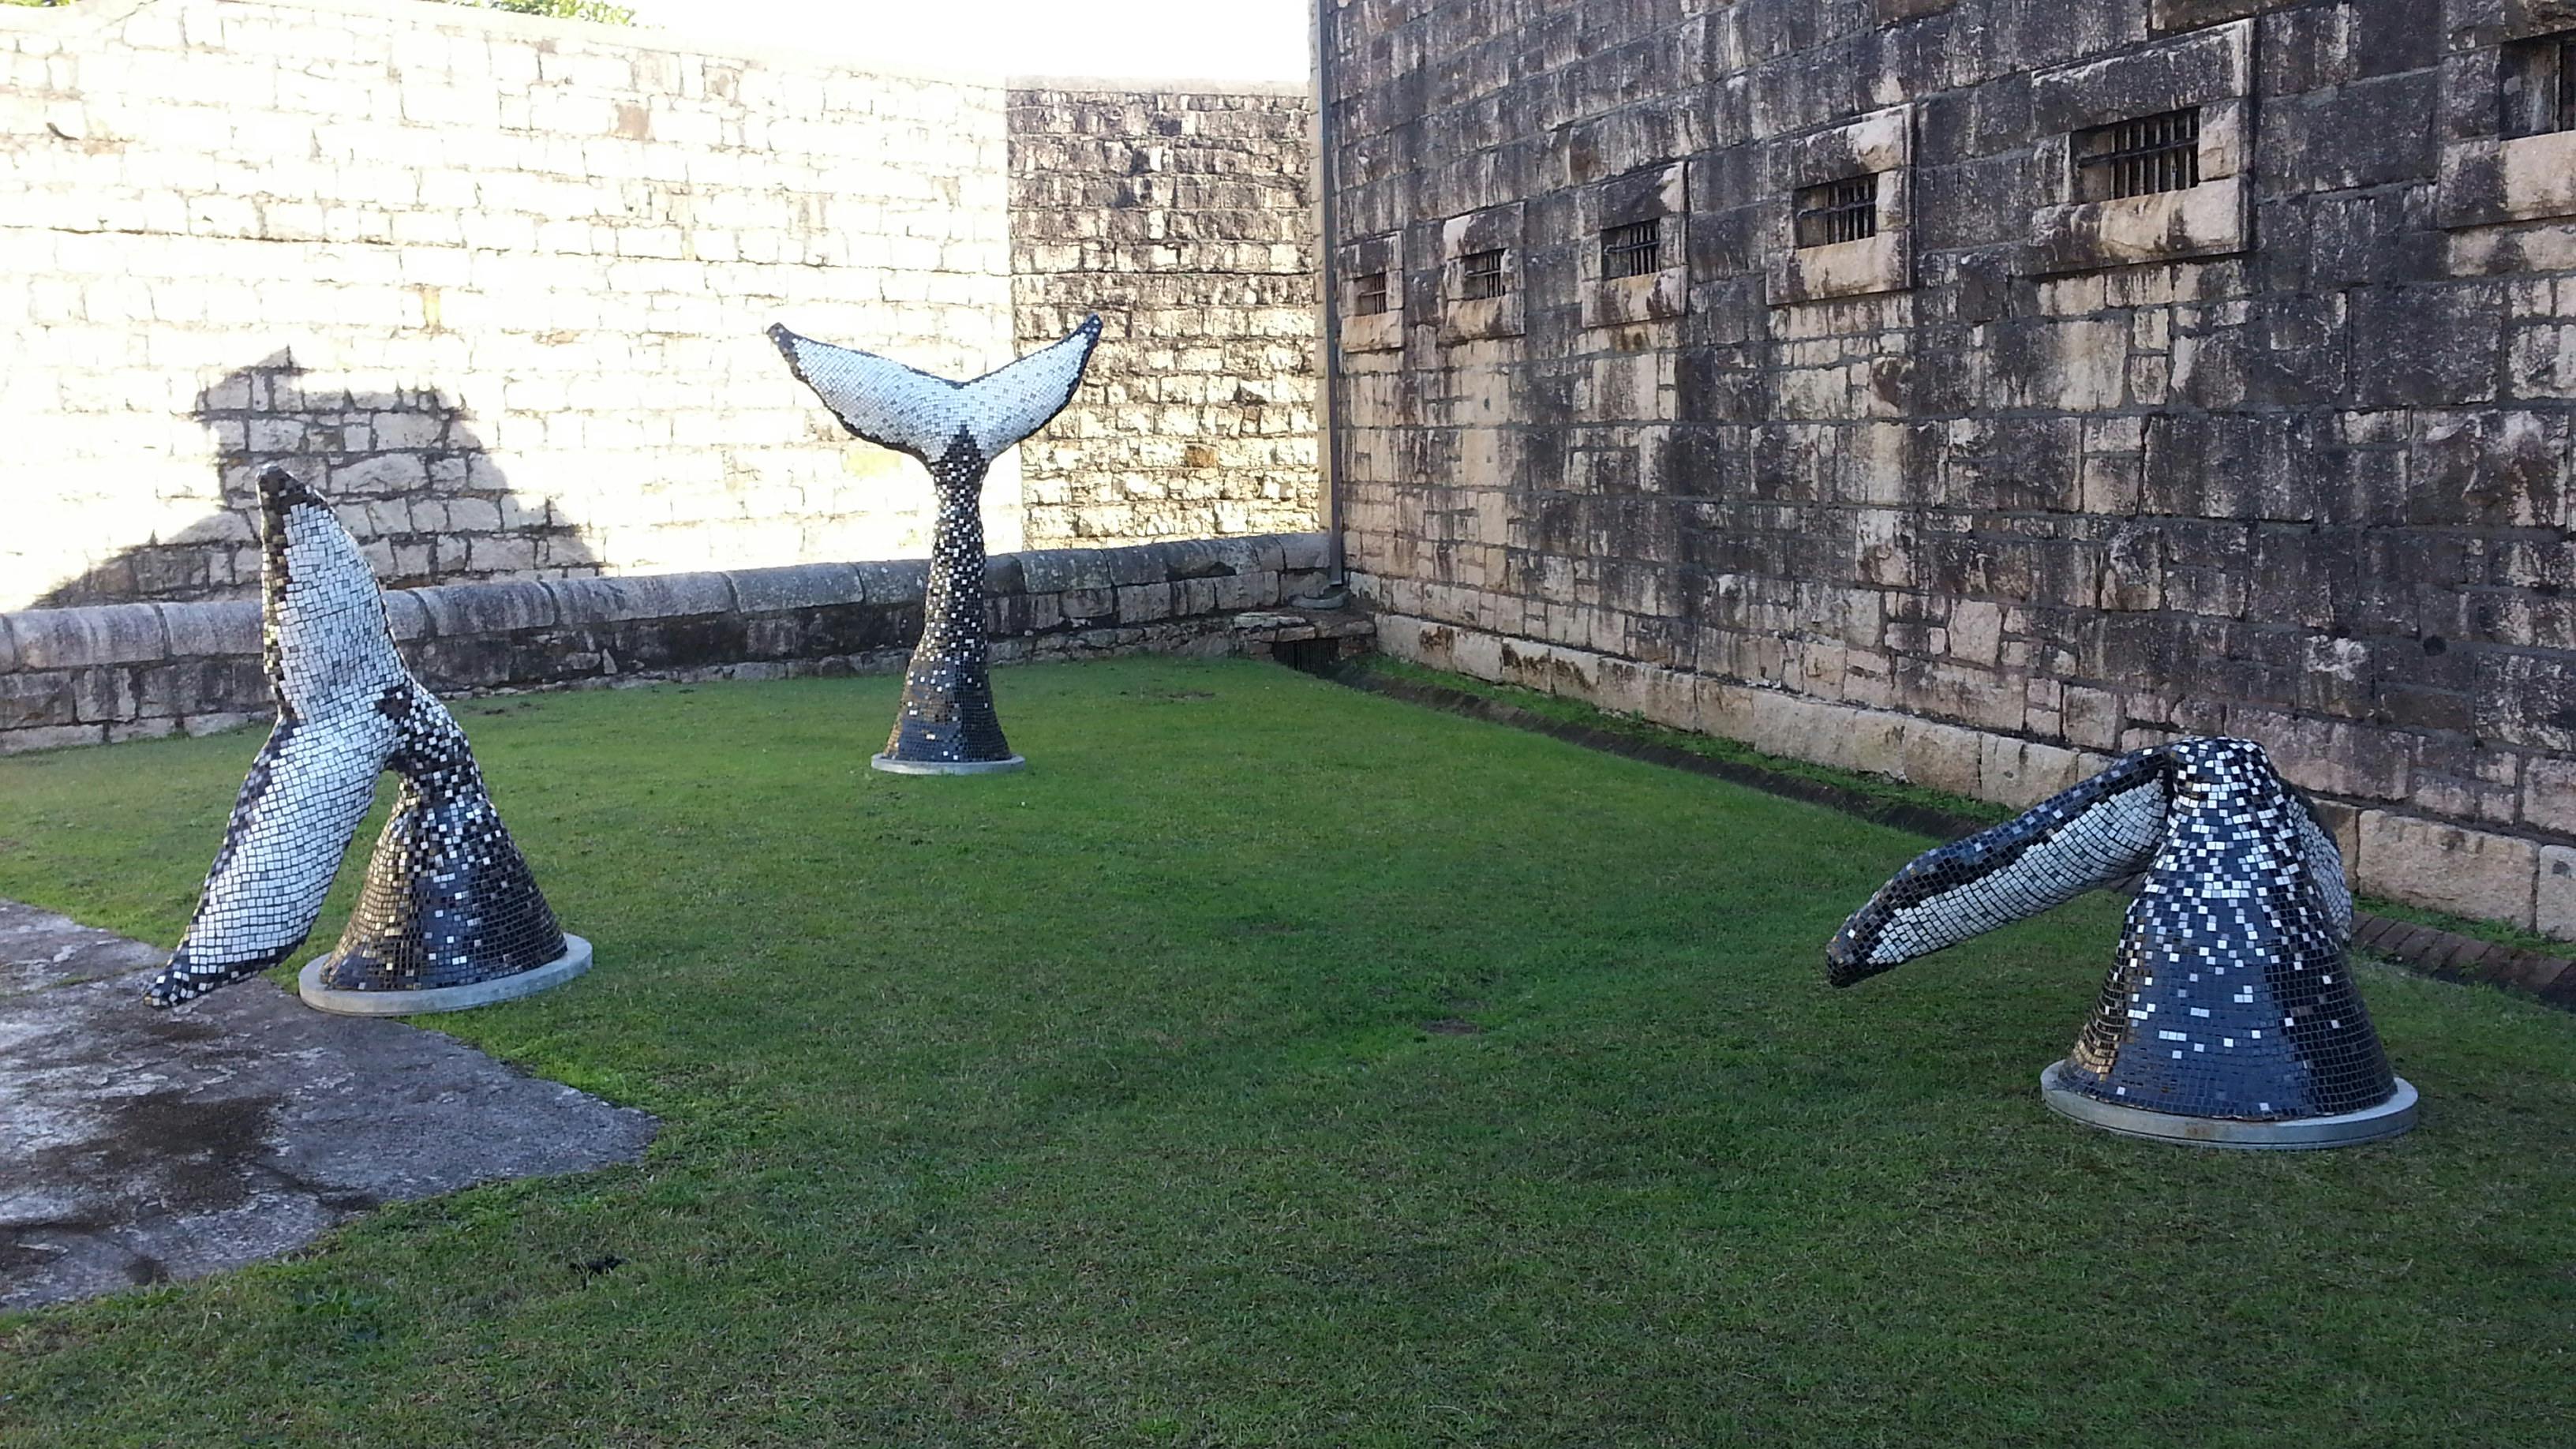 Sculptures in the Gaol - Trial Bay Gaol